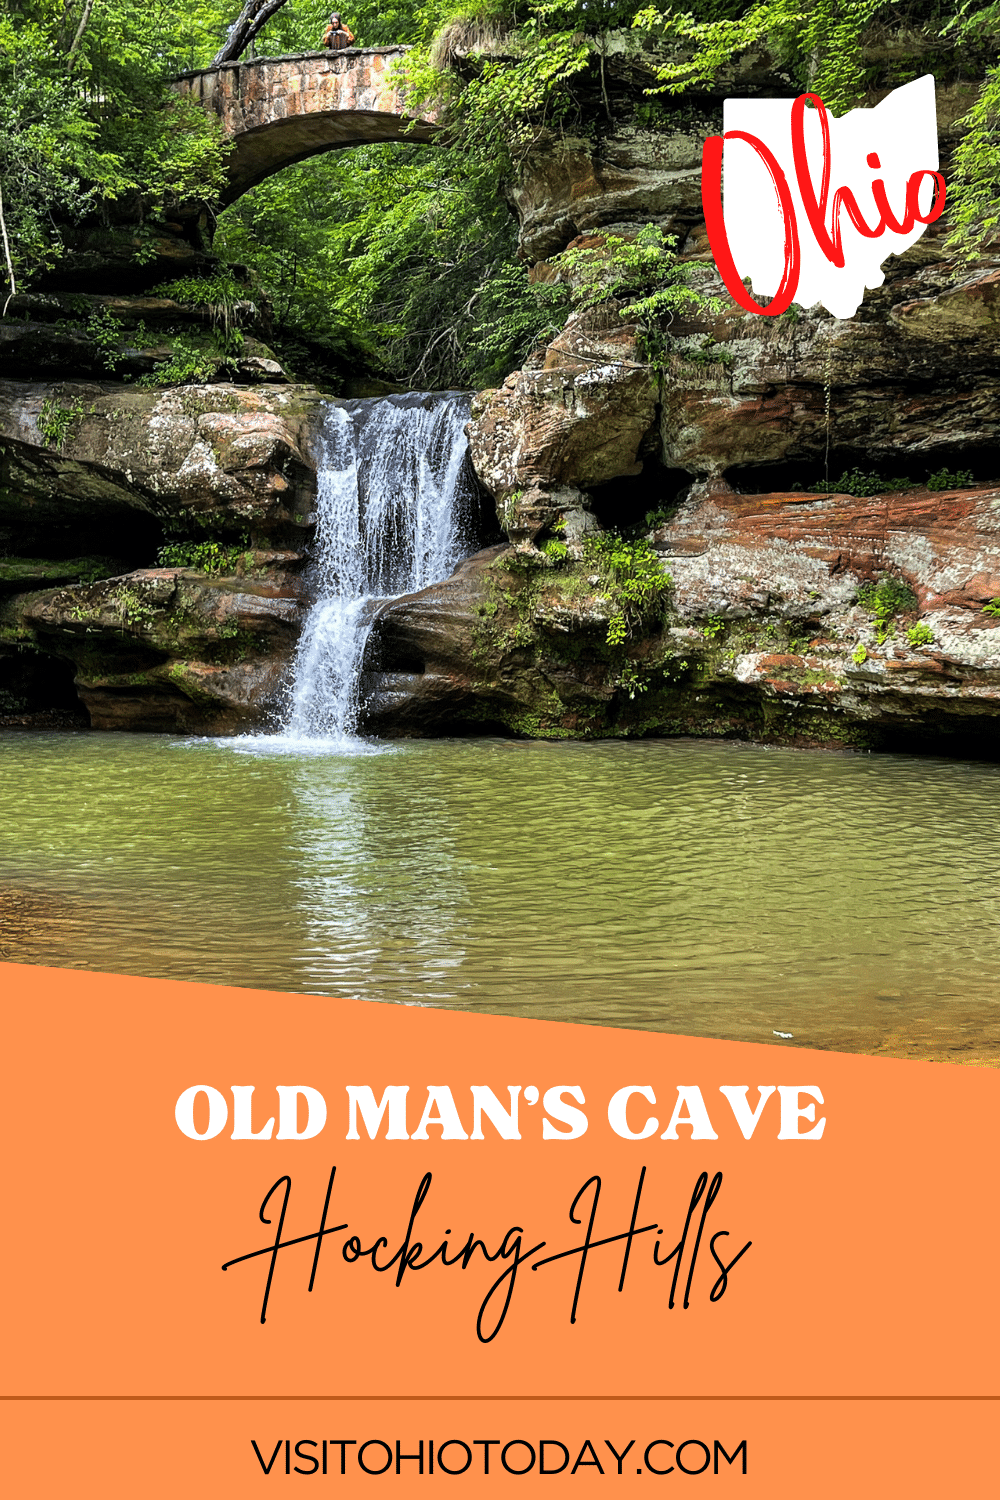 Old Man´s Cave travels through an amazing gorge, that is cut through a 150-foot thickness of Blackhand sandstone.